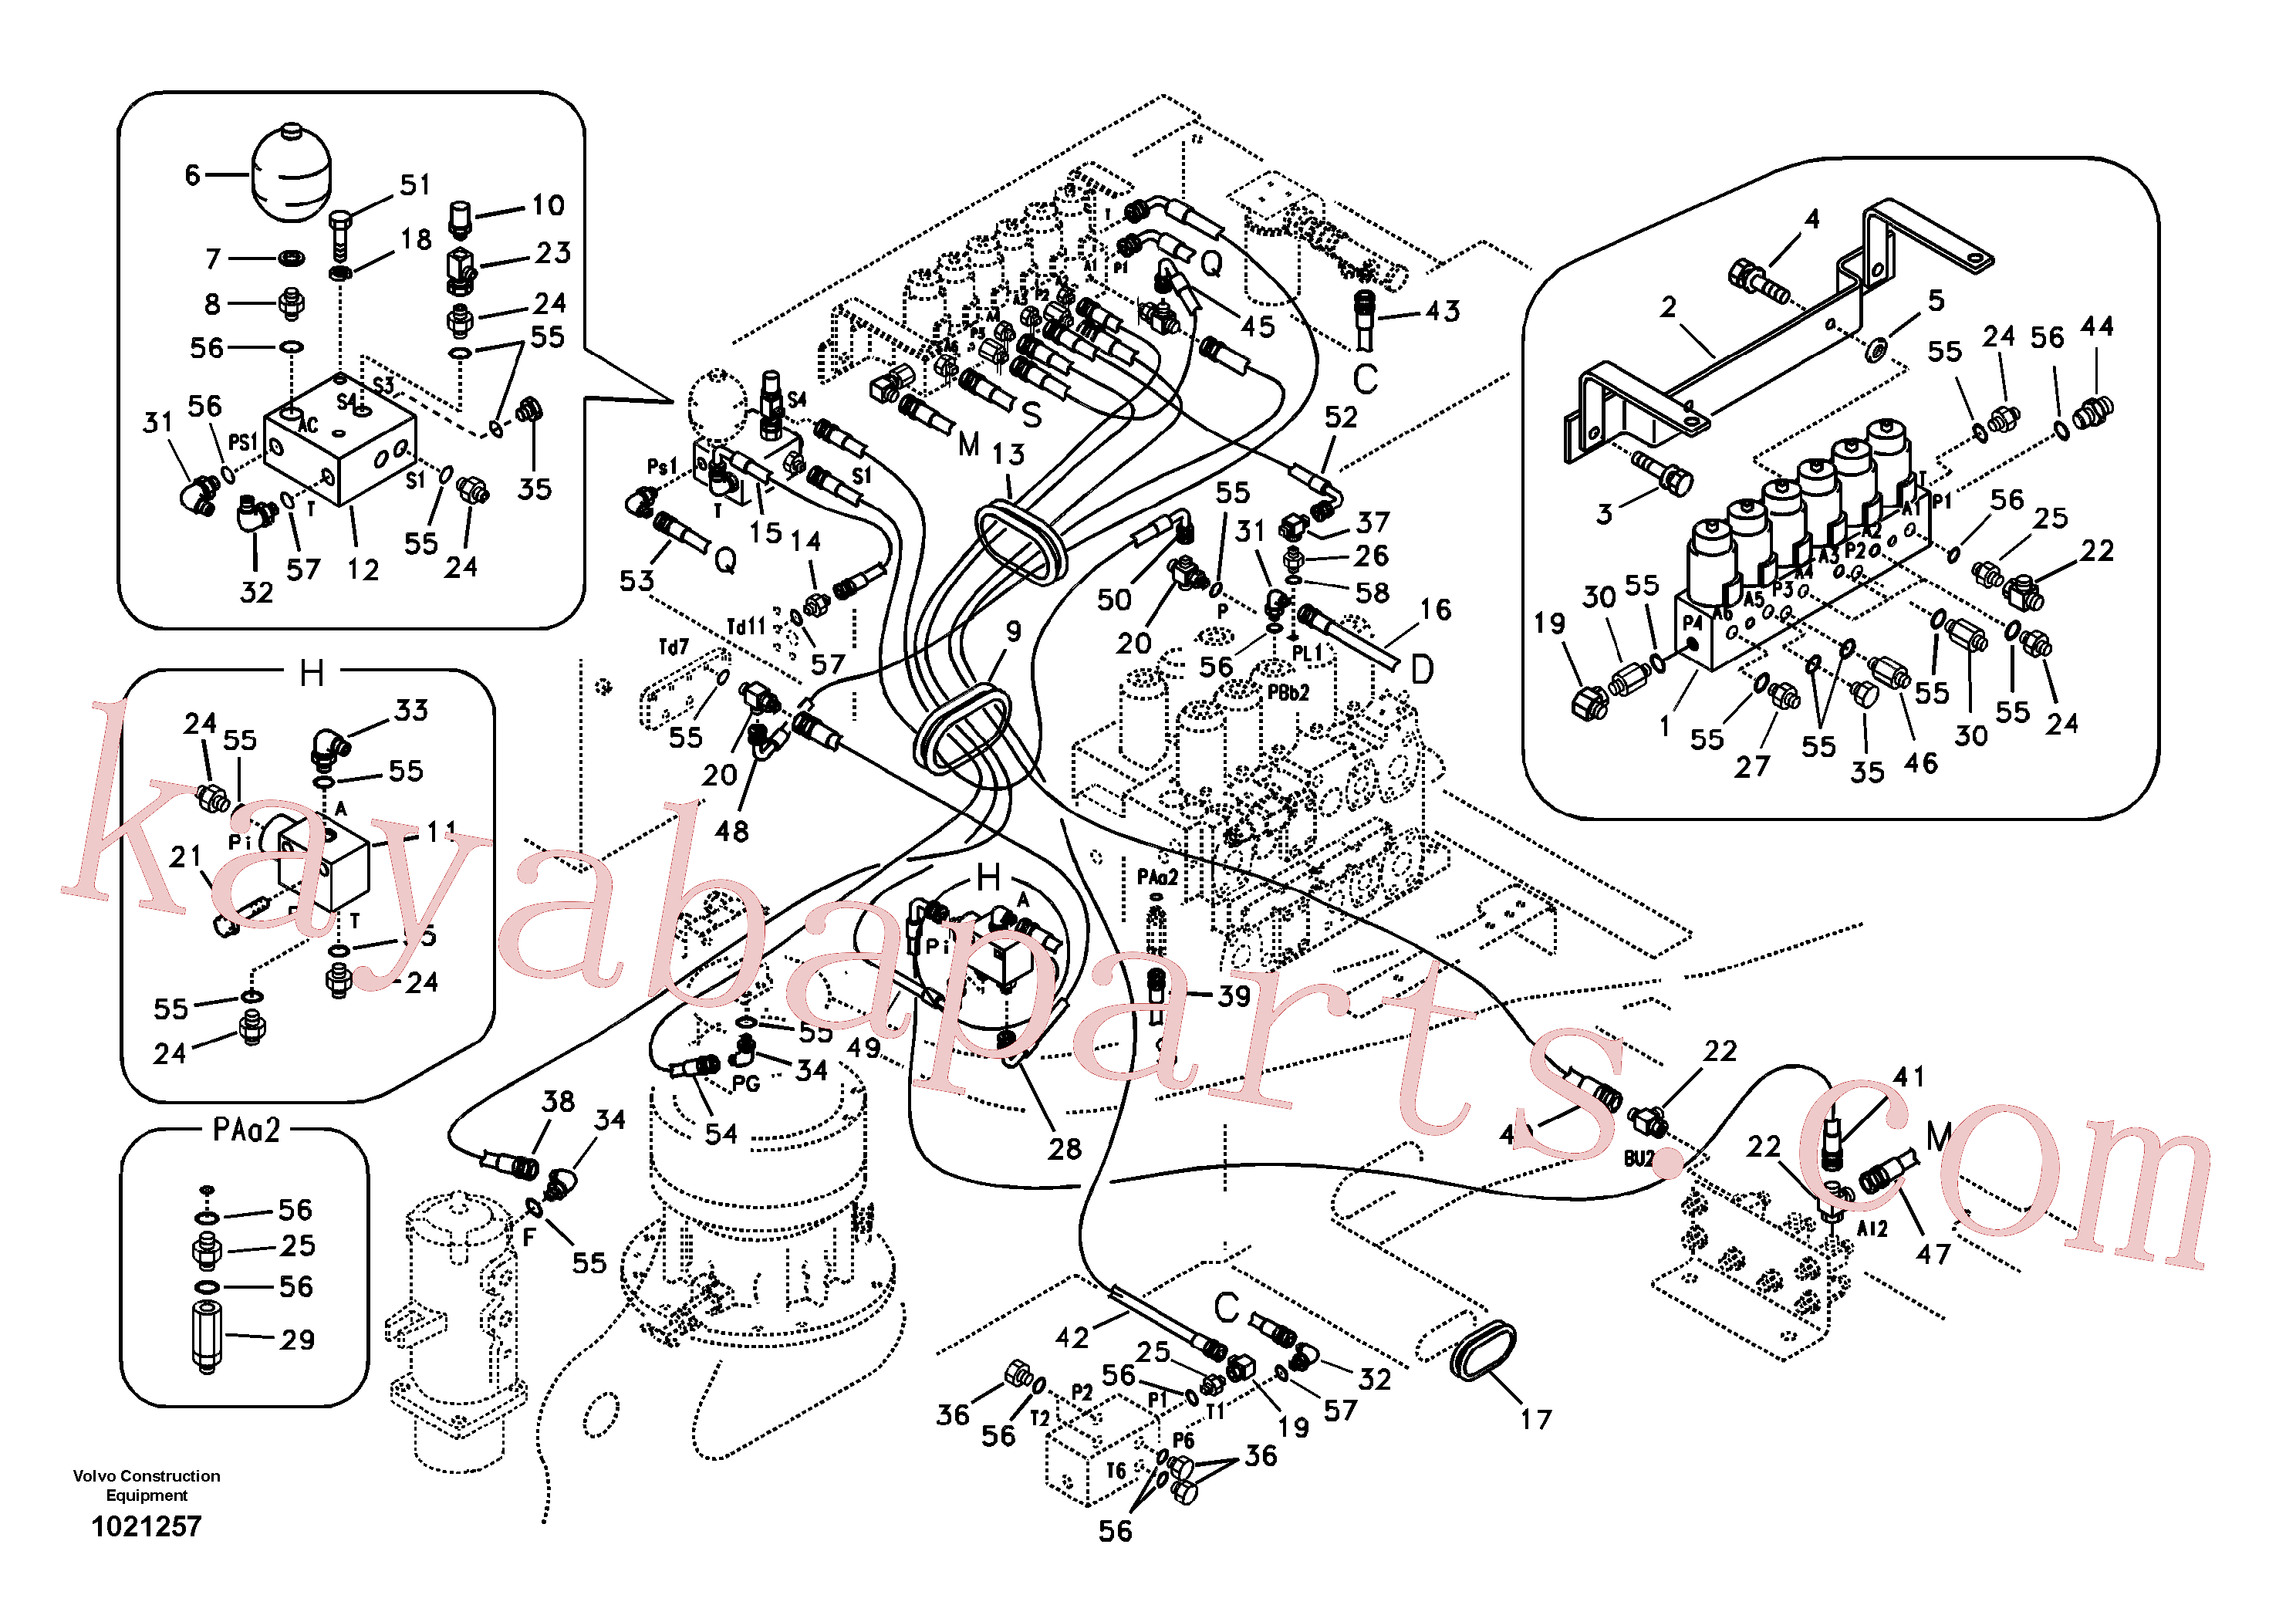 SA9451-02259 for Volvo Servo system, control valve to solenoid valve(1021257 assembly)